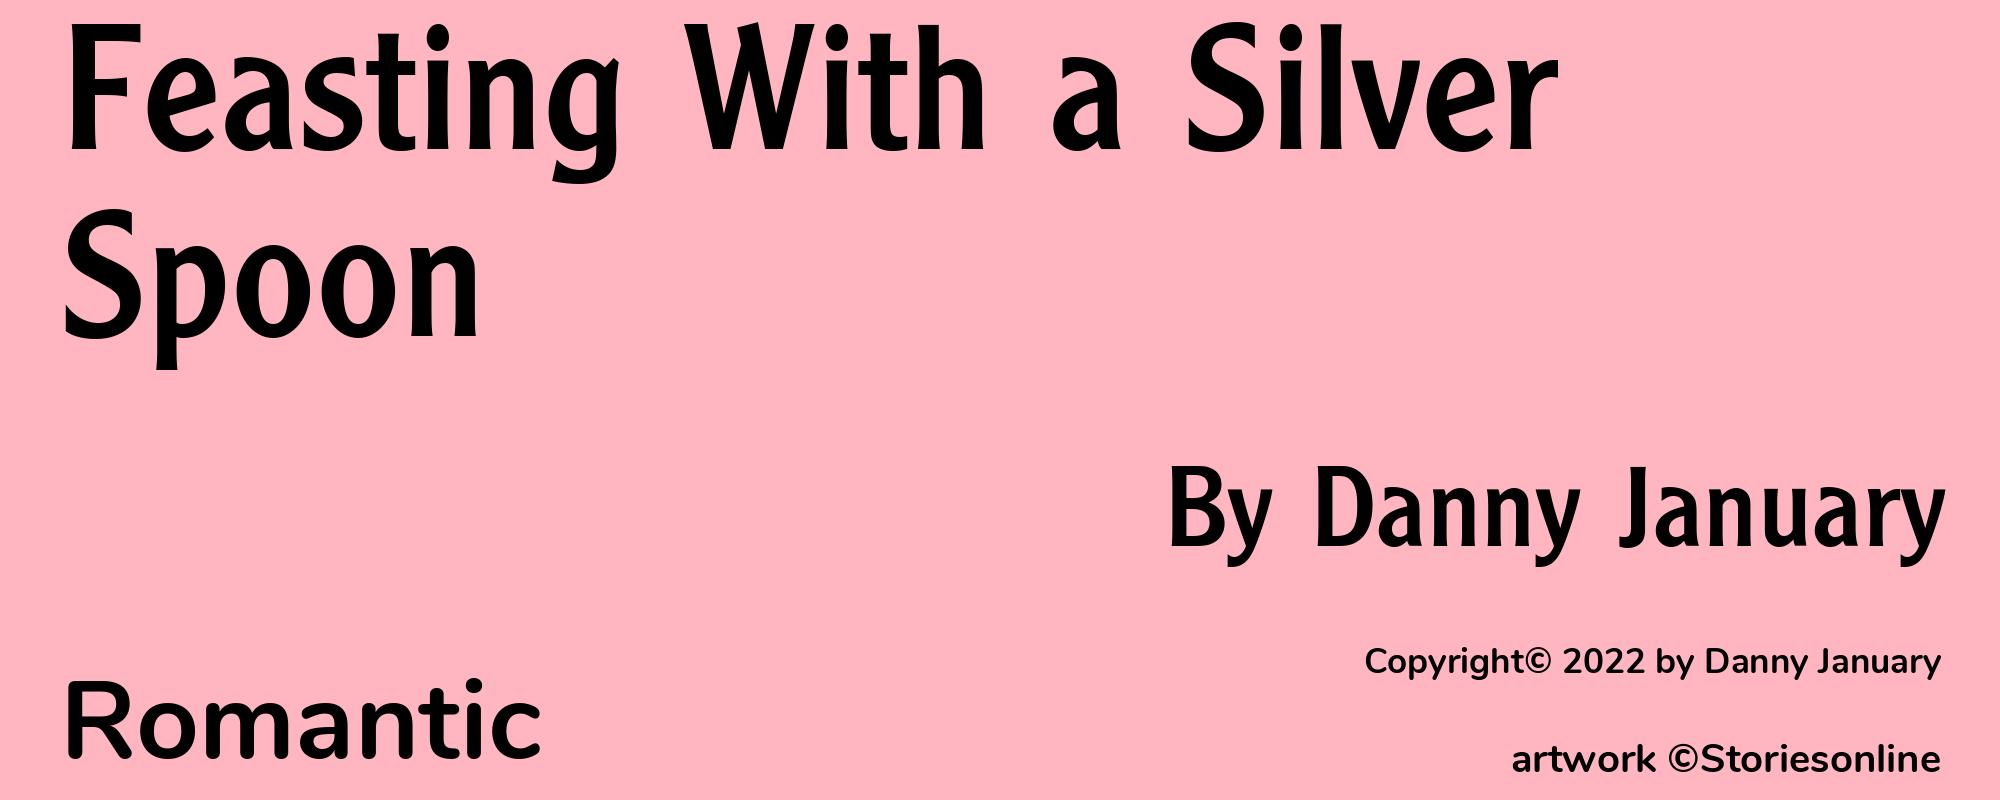 Feasting With a Silver Spoon - Cover